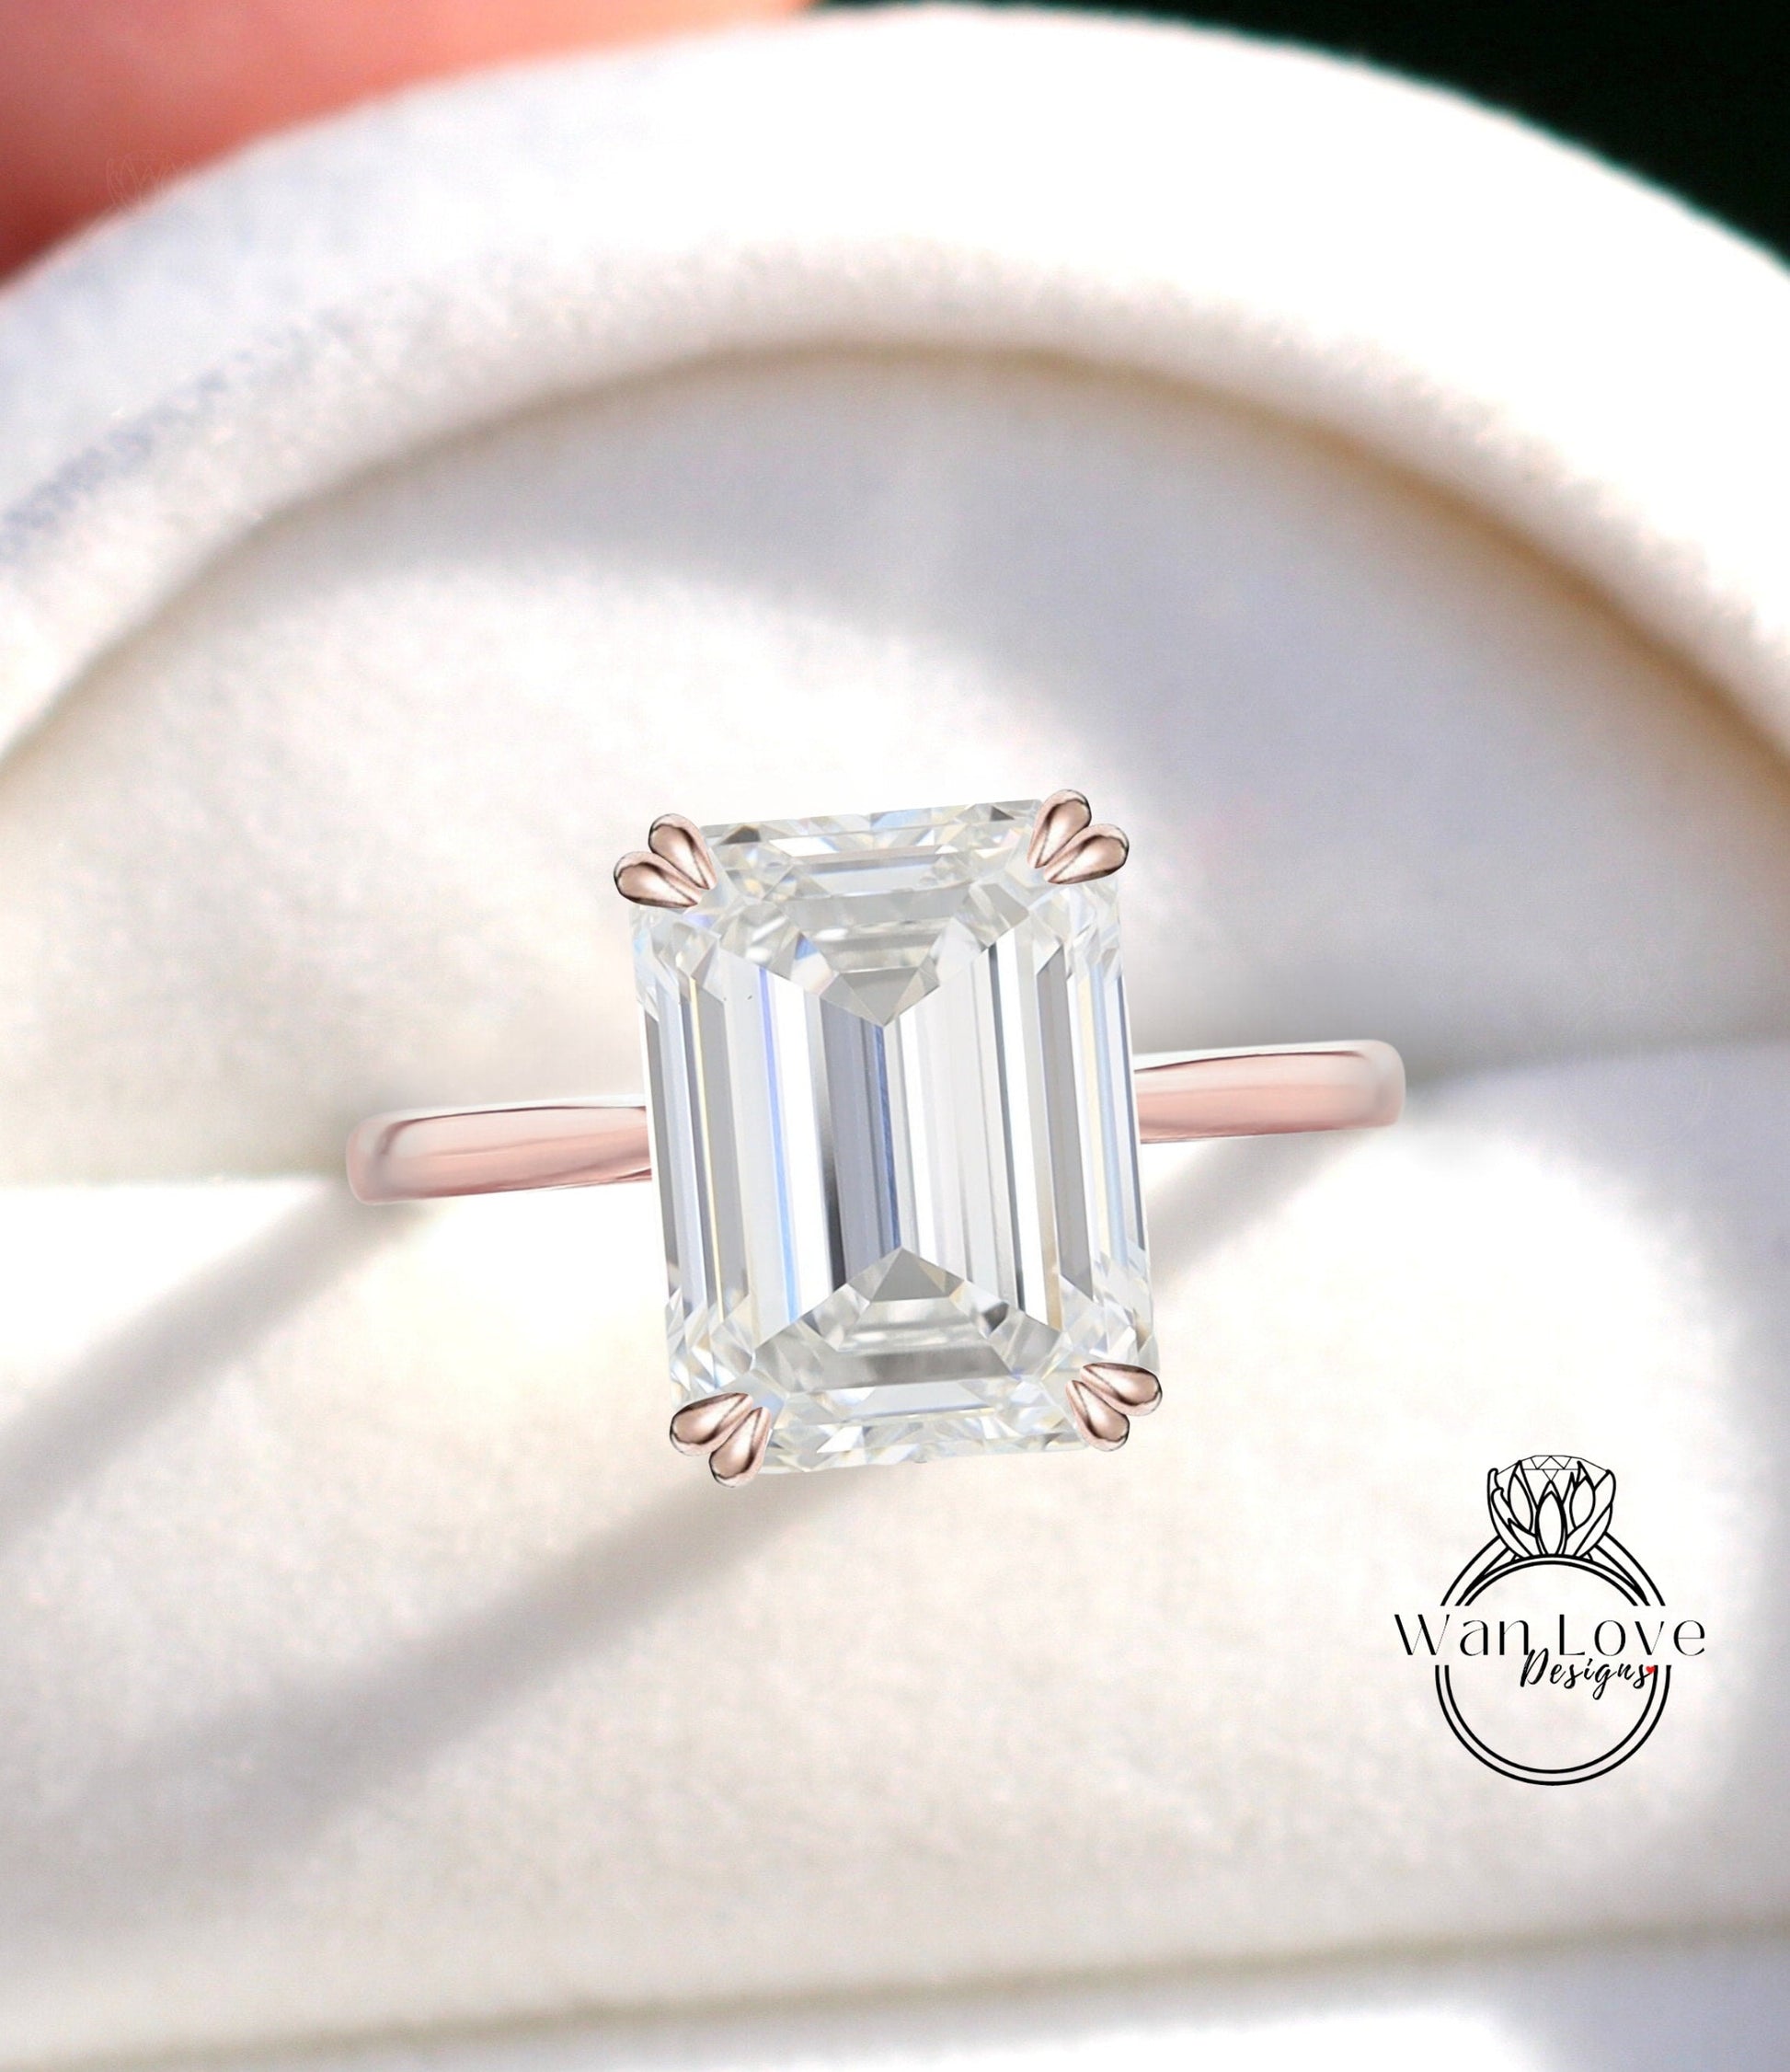 Emerald Cut Moissanite Engagement Ring, 14k White Gold Double prong Solitaire Ring, Plain Wedding Band, Womens Anniversary Ring, Bridal Ring Wan Love Designs